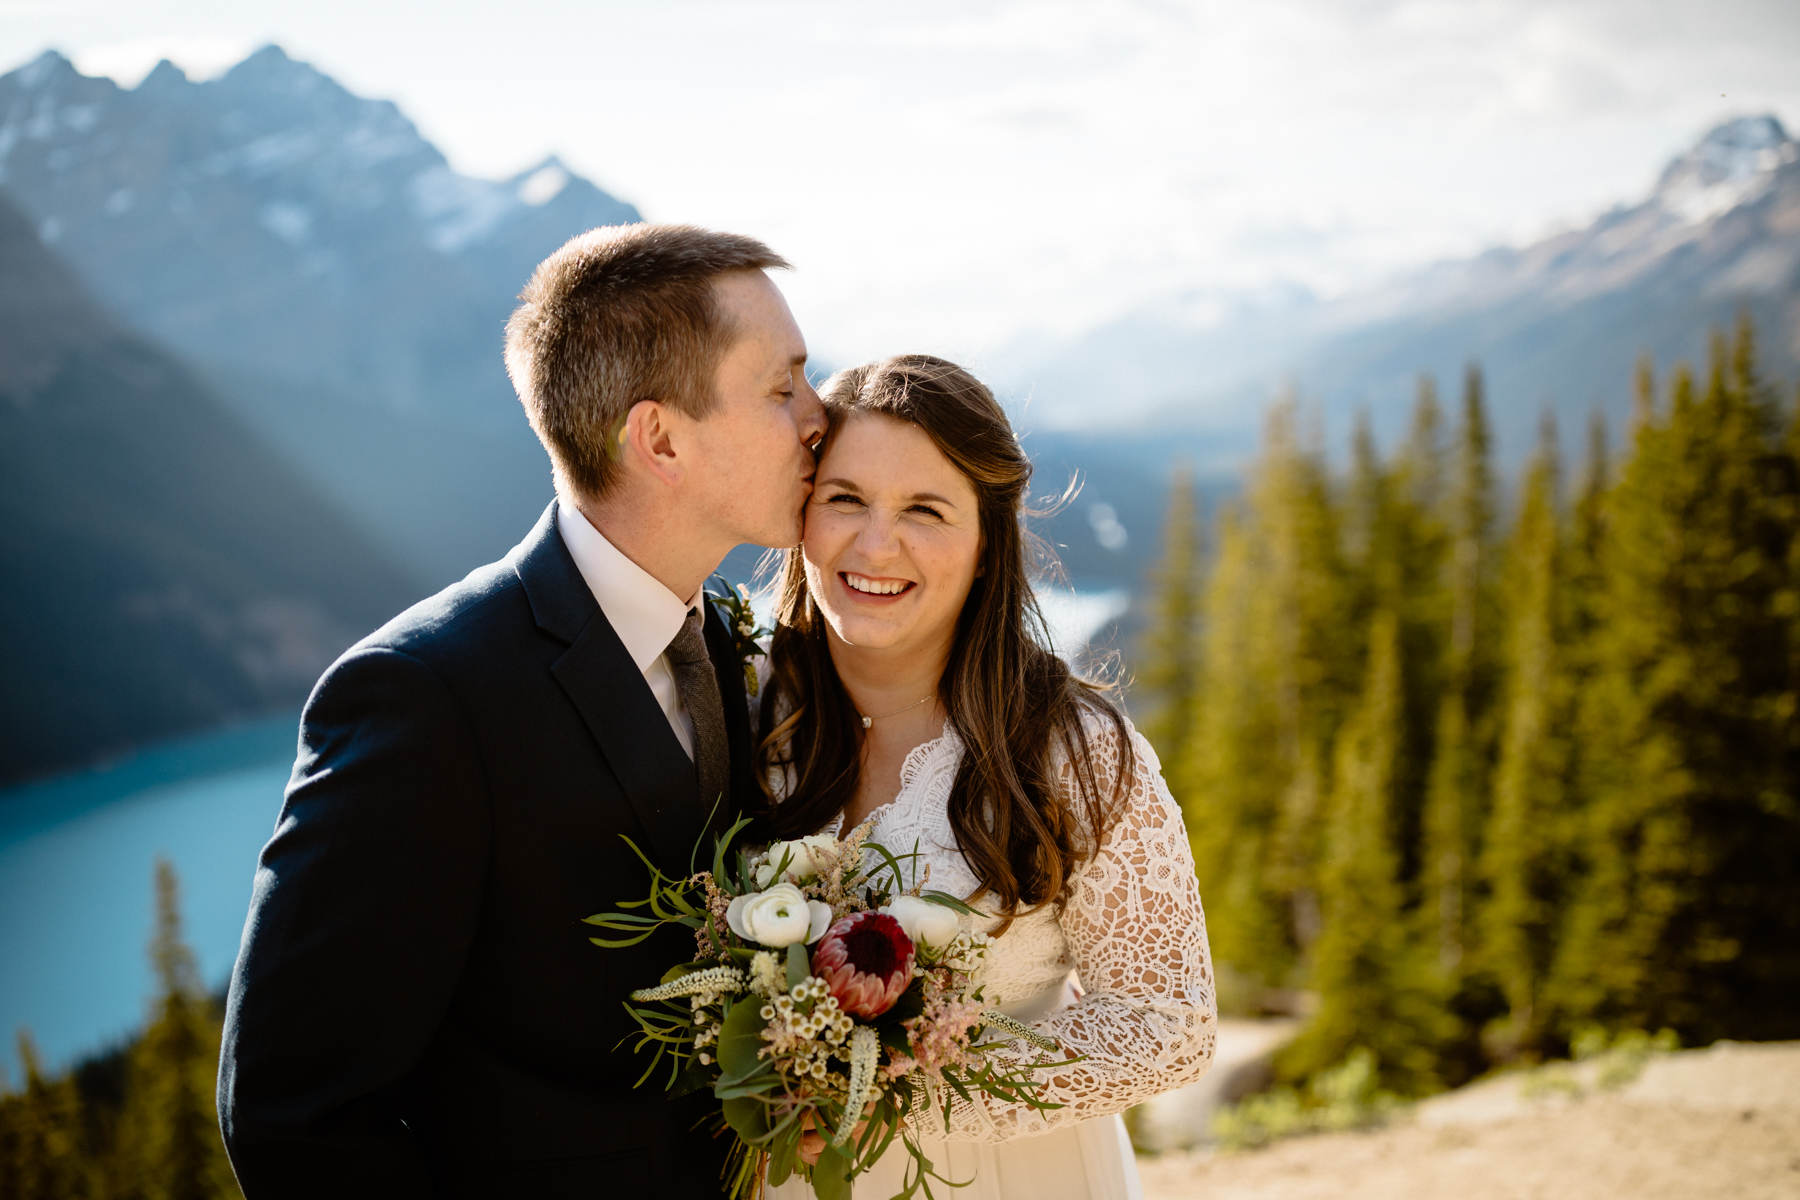 Vow Renewal Photography in Banff - Image 20